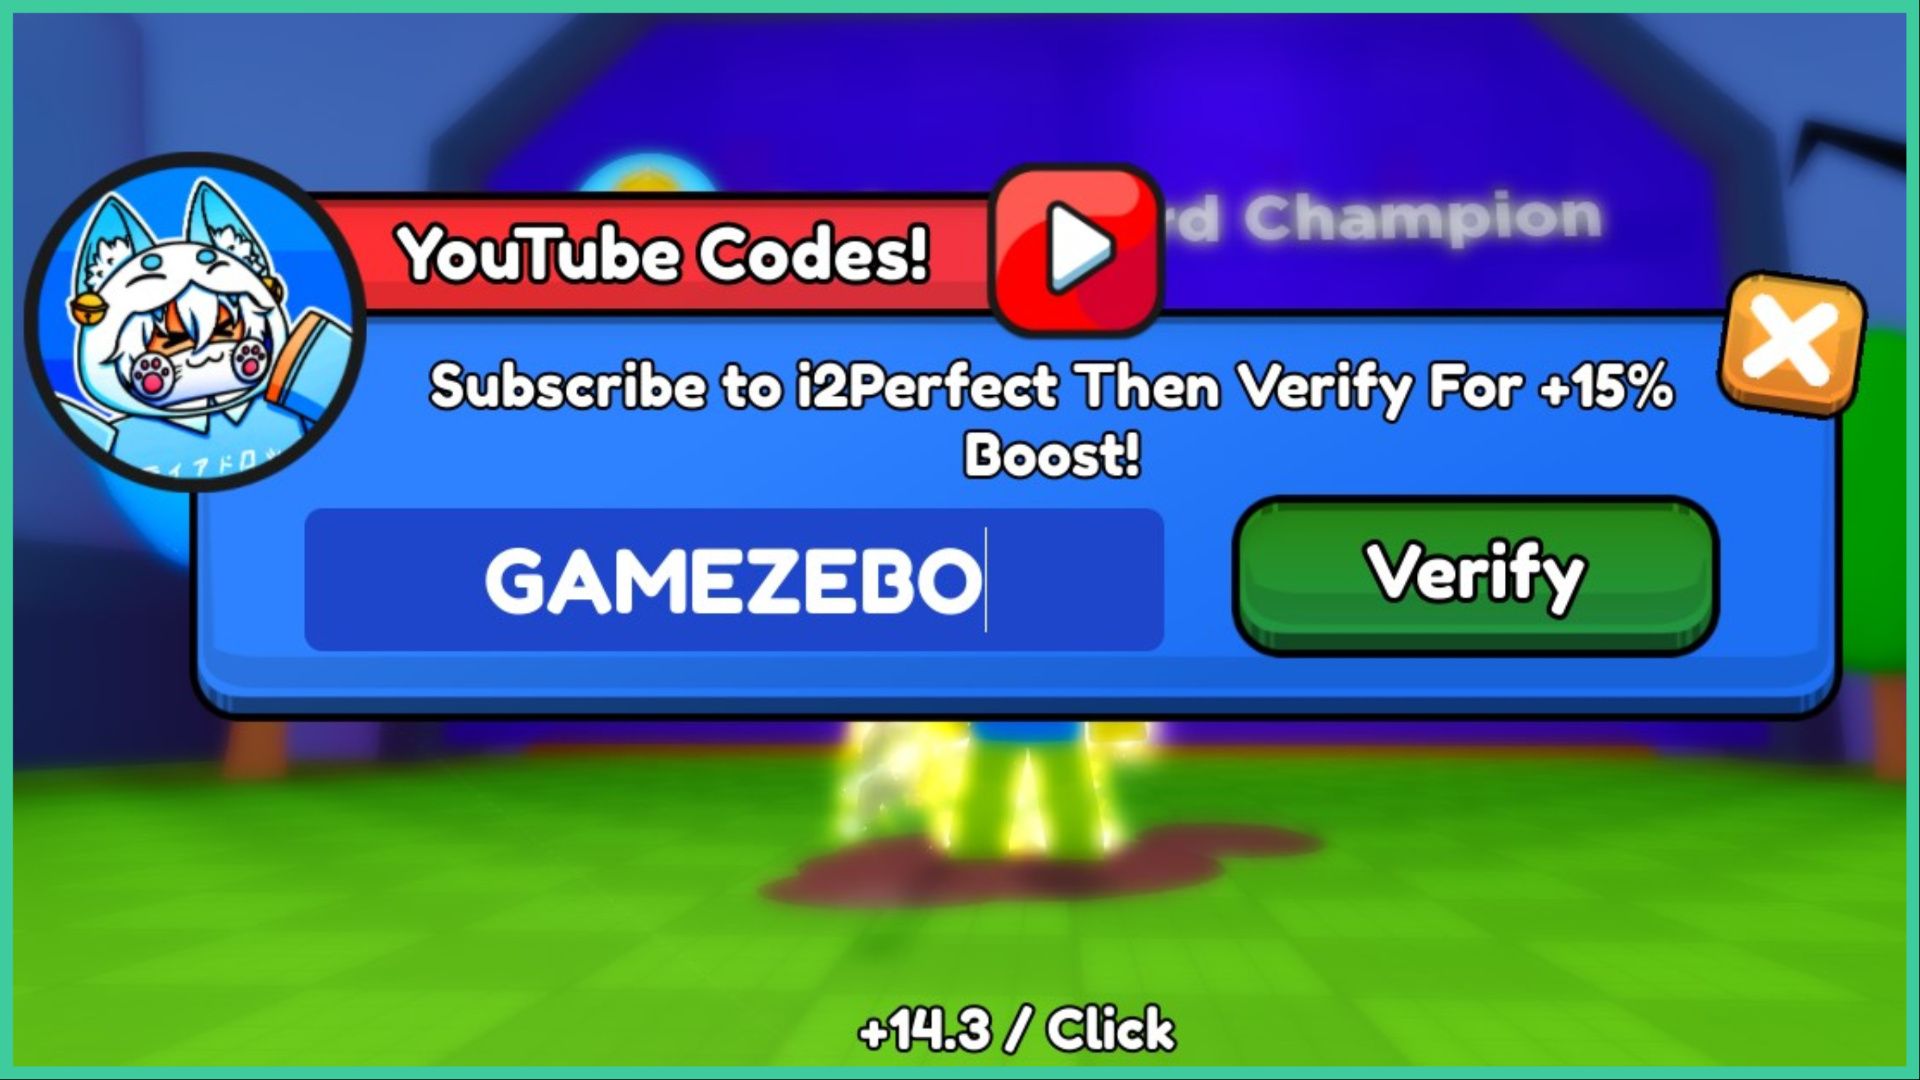 feature image for our extalia simulator codes guide, it's a screenshot of the youtube codes box, with GAMEZEBO written in the text box with the green verify button next to it, there is a drawing of a character wearing a goot with wolf ears and a bell while wearing a cat face mask with paws on each side